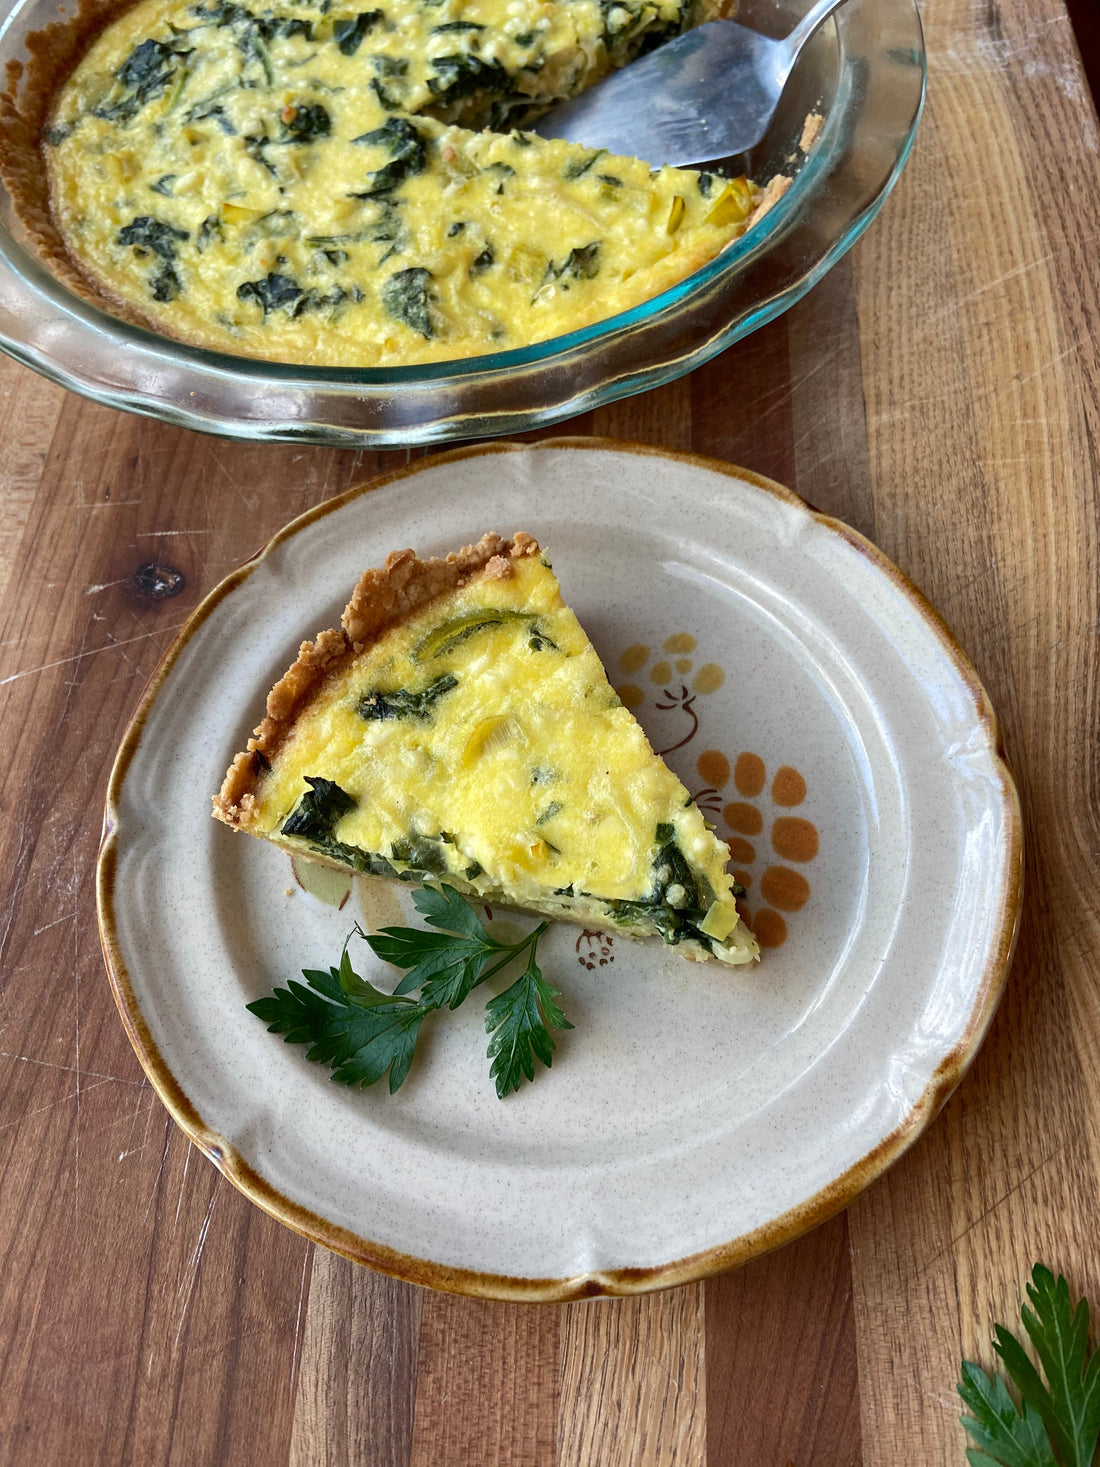 Spinach, Leek and Goat Cheese Quiche